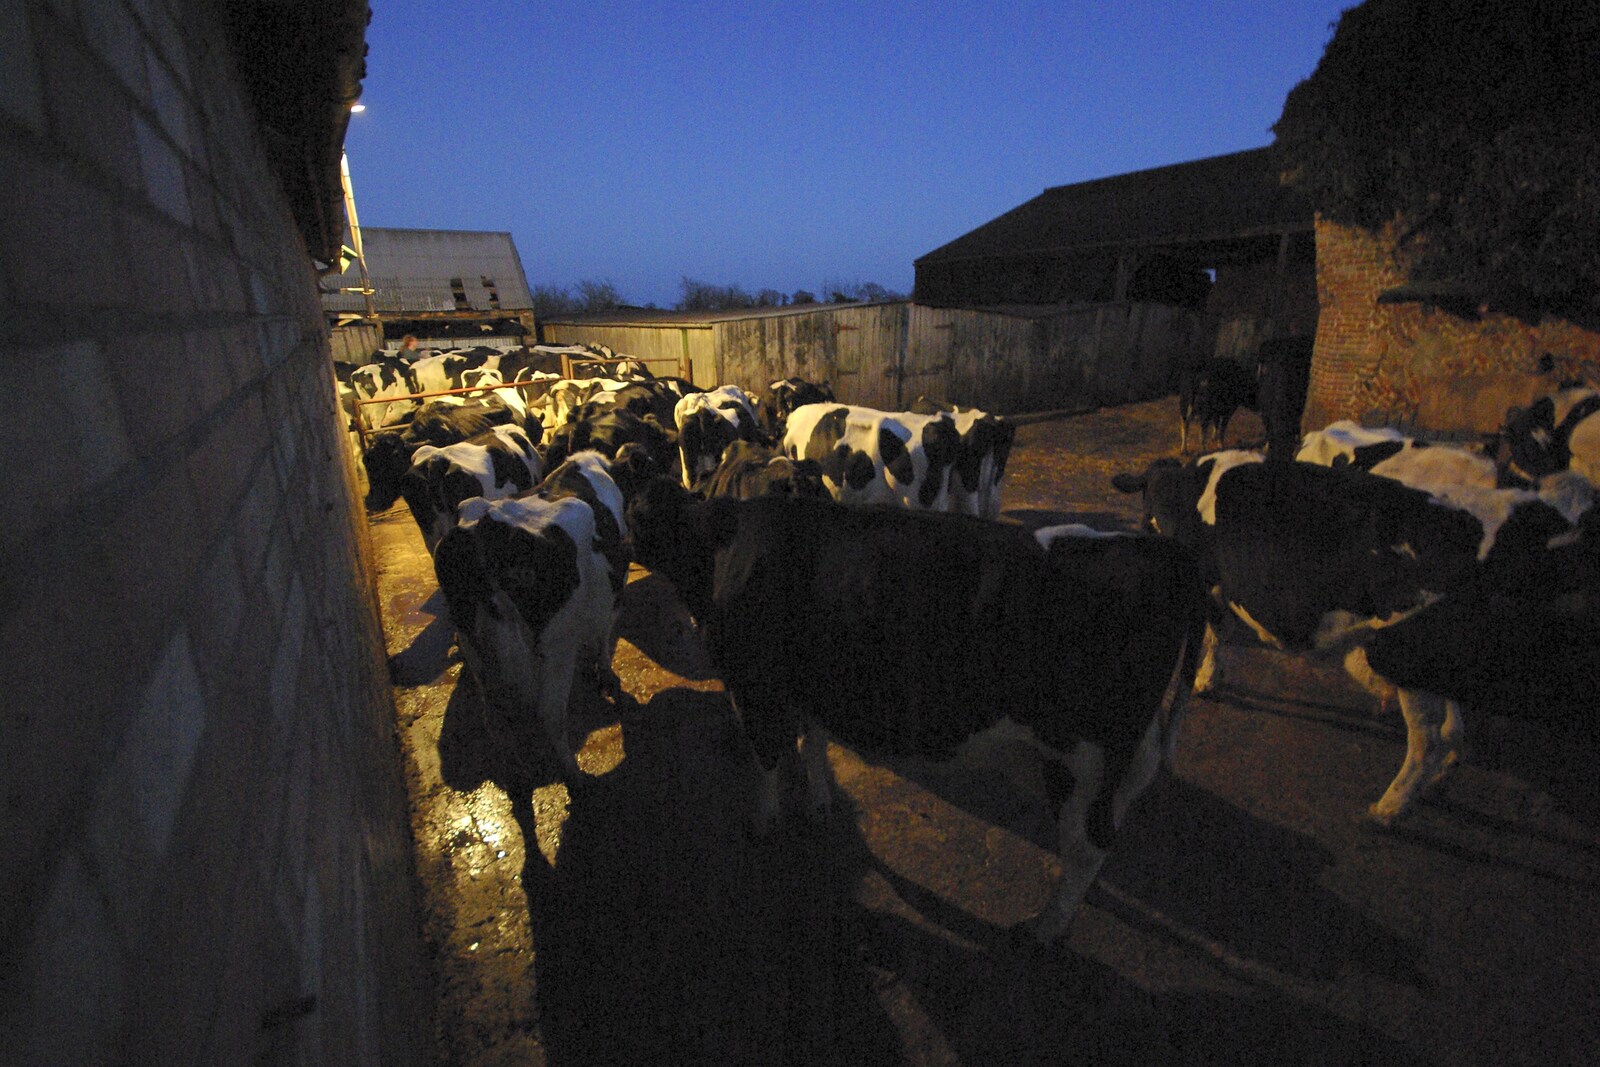 The cows mill around in the dusk from The Last Milking at Dairy Farm, Thrandeston, Suffolk - 11th January 2007